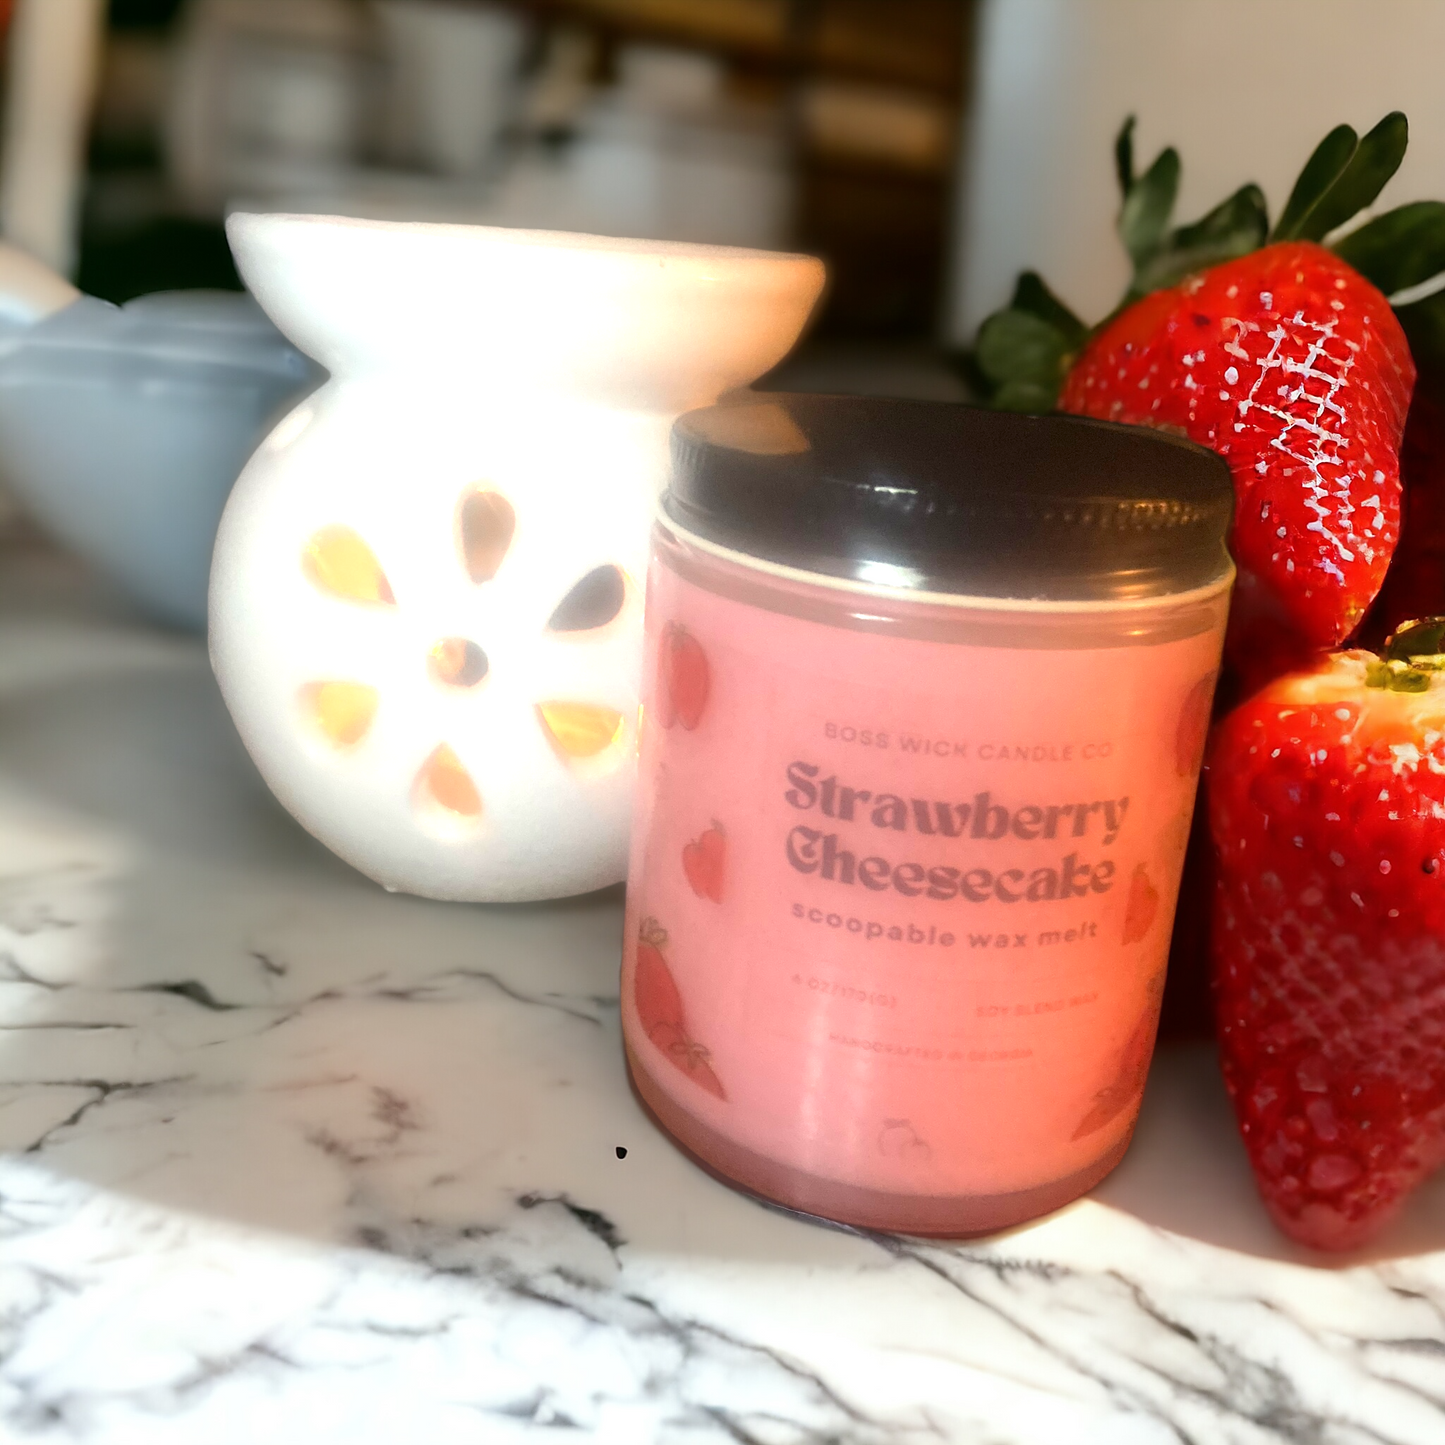 Strawberry Cheesecake scoop-able wax melt